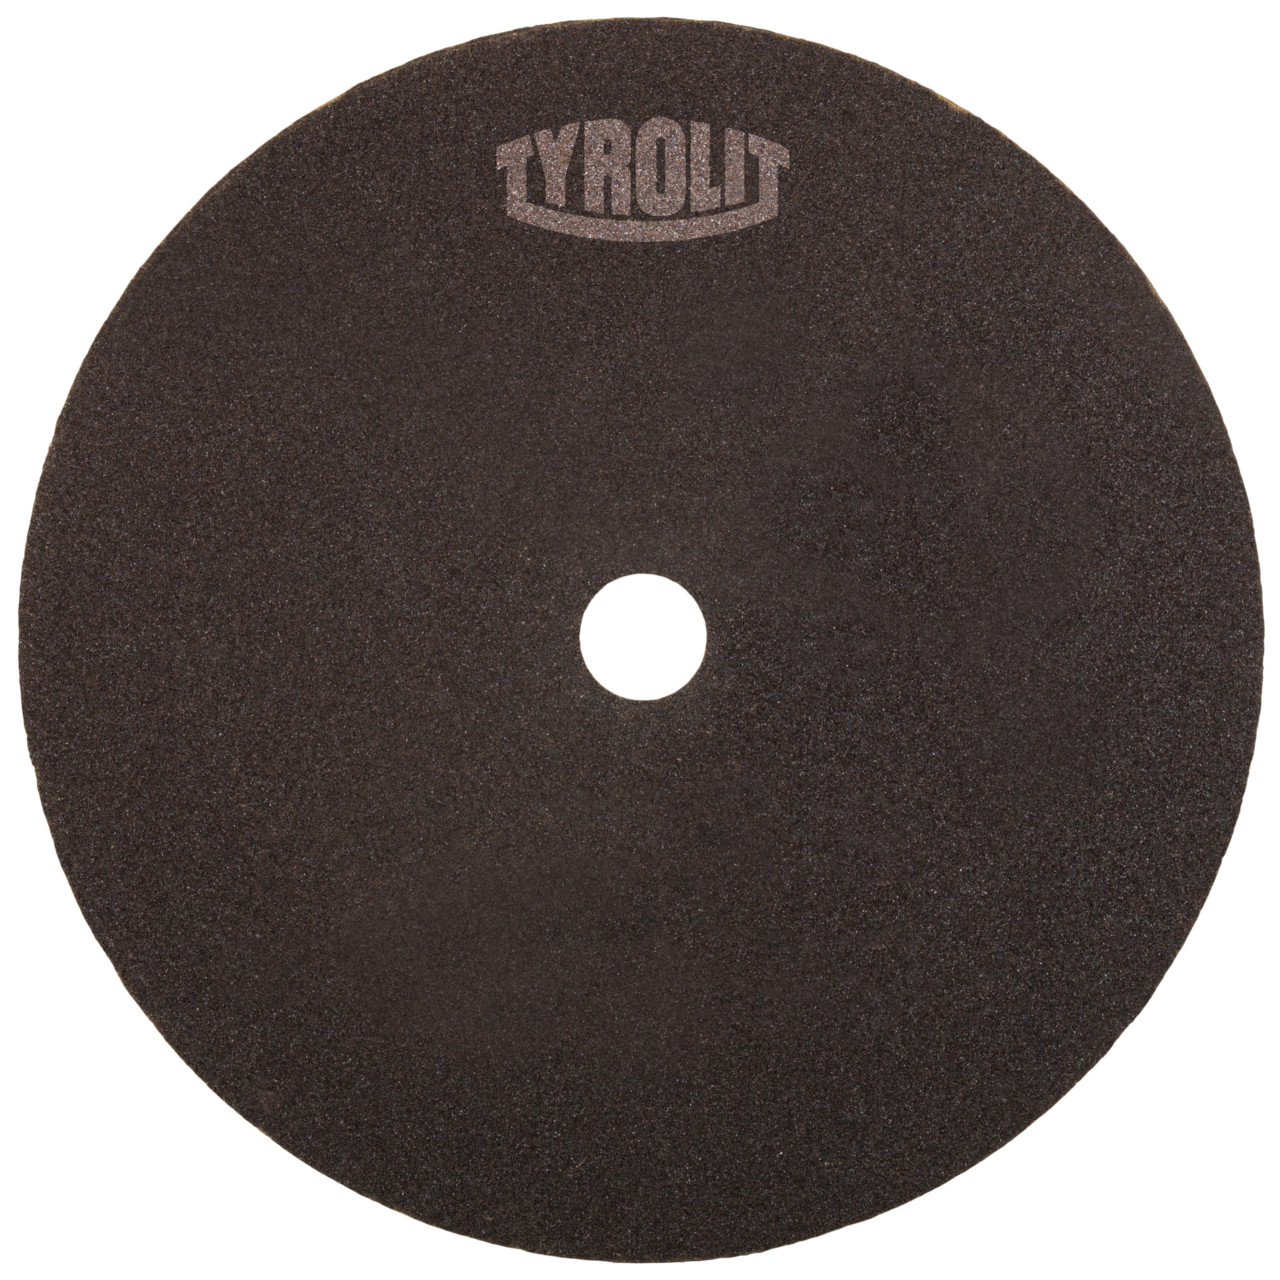 Tyrolit Cutting disc for cutting and saw sharpening DxDxH 200x1.5x20 For steel and HSS, shape: 41N - straight version (non-woven cutting disc), Art. 1254